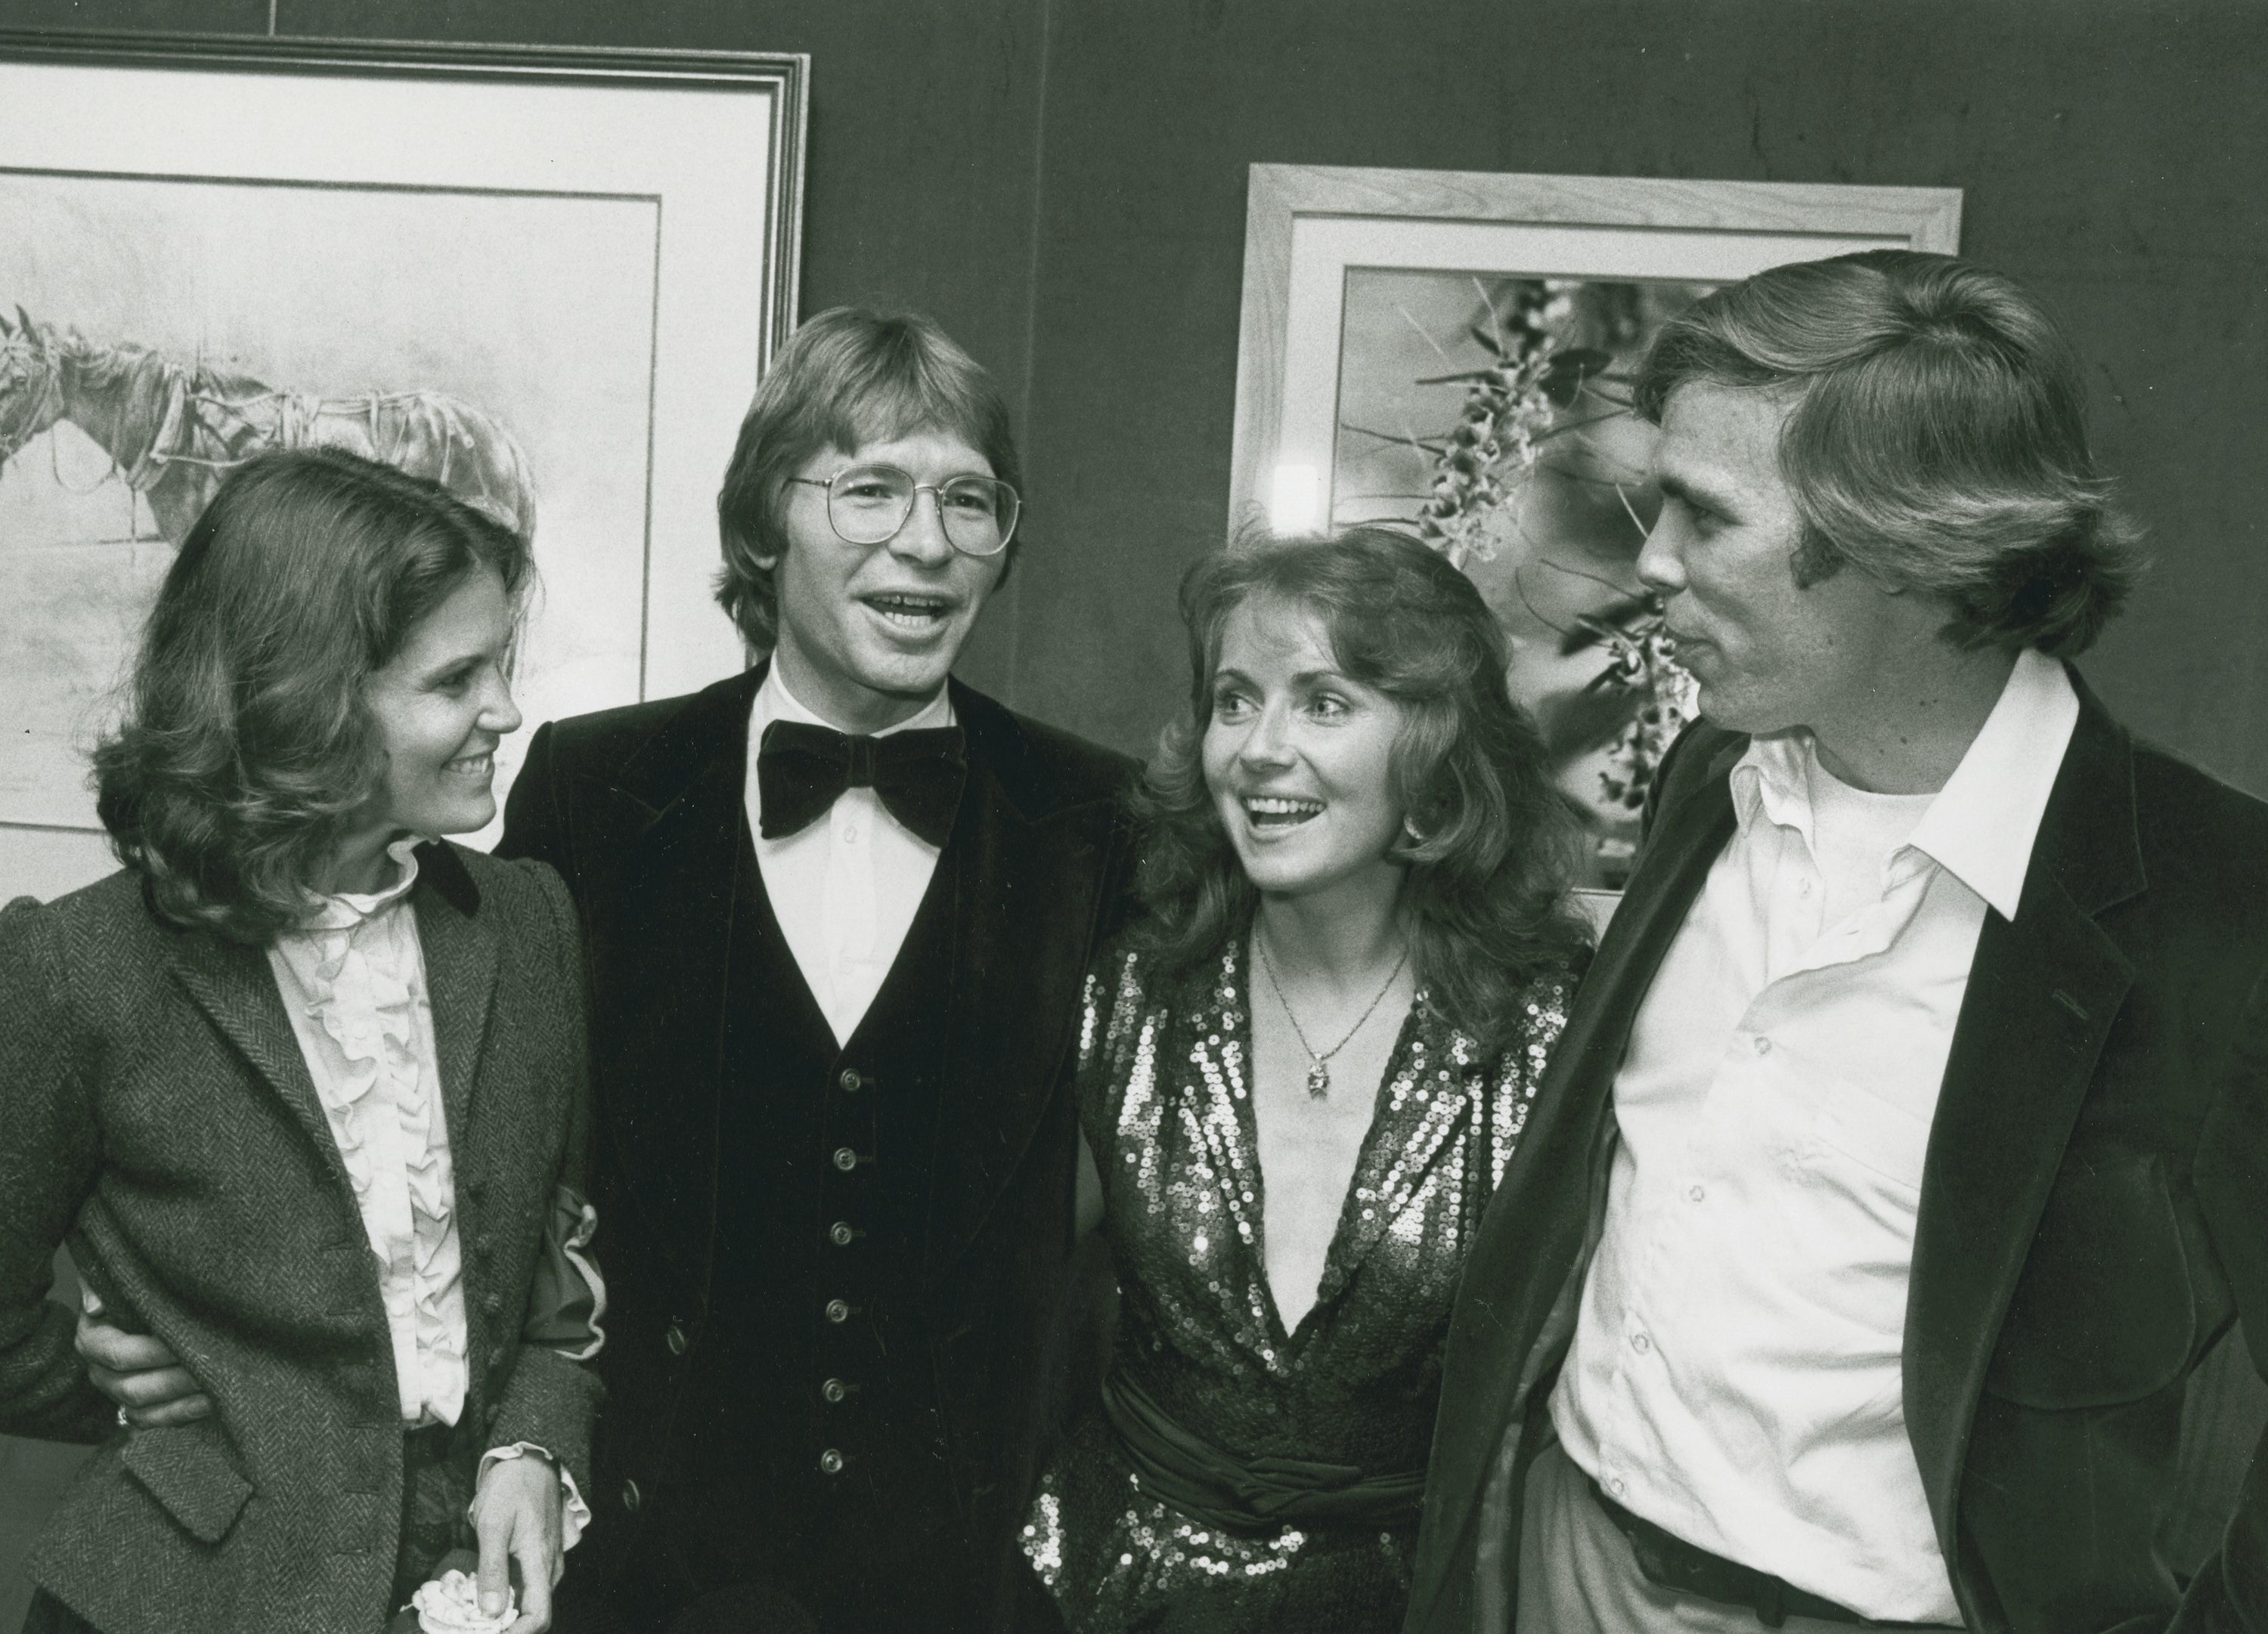 John Denver, Annie Martell and artist David Armstrong at the John Denver-David Armstrong Art Exhibit on December 1, 1980, in Los Angeles, California. | Source: Getty Images